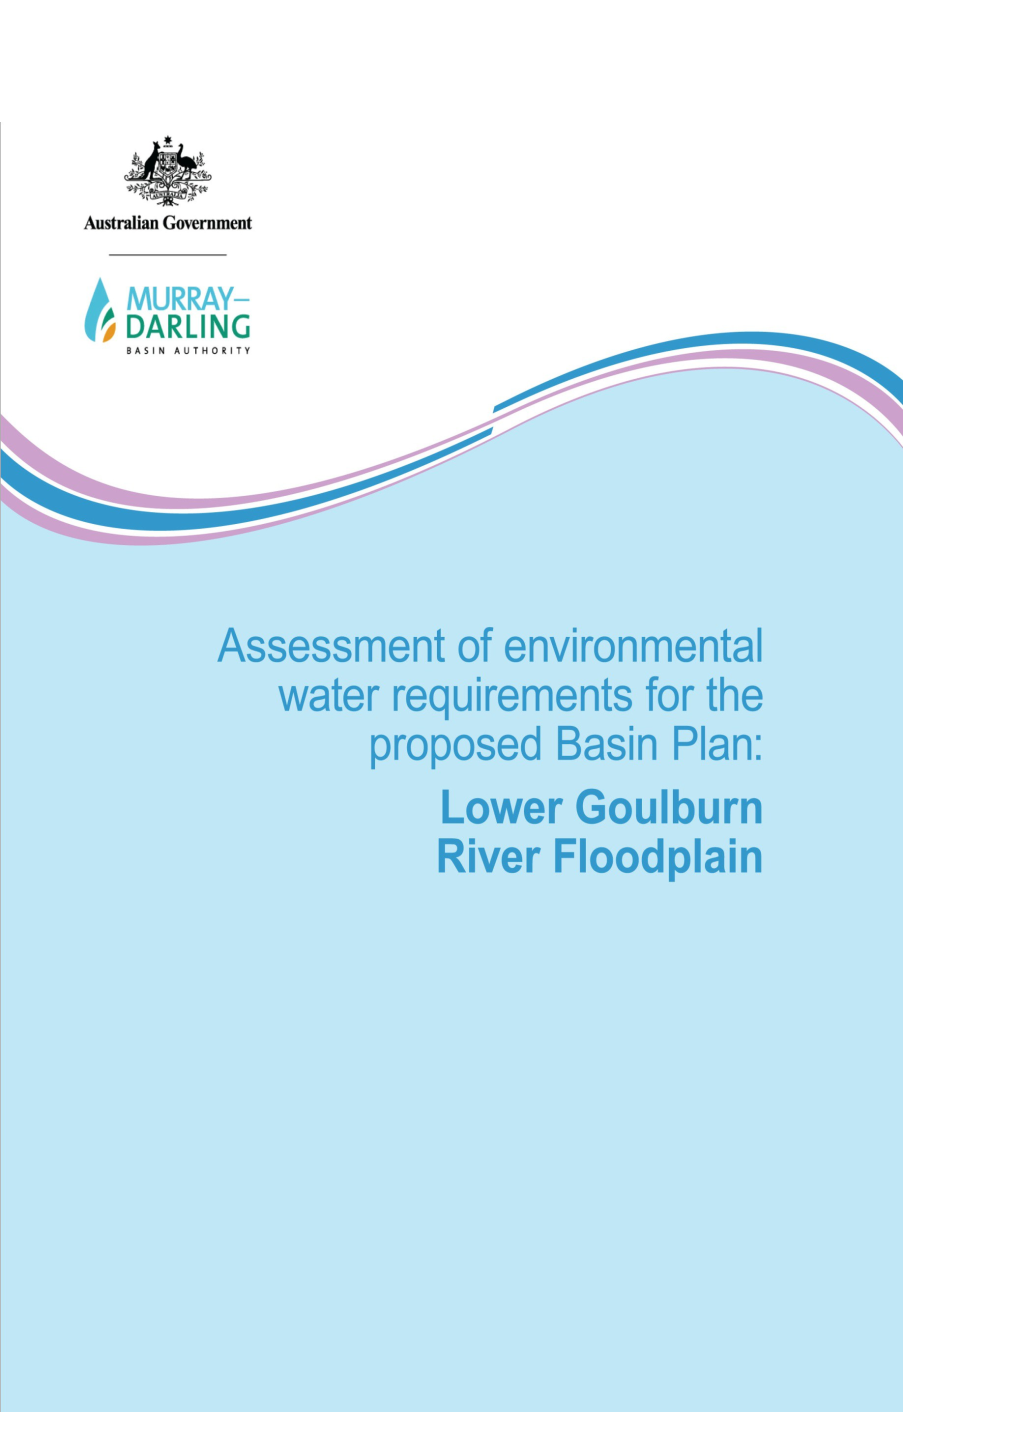 Assessment of Environmental Water Requirements for the Proposed Basin Plan:Lower Goulburn